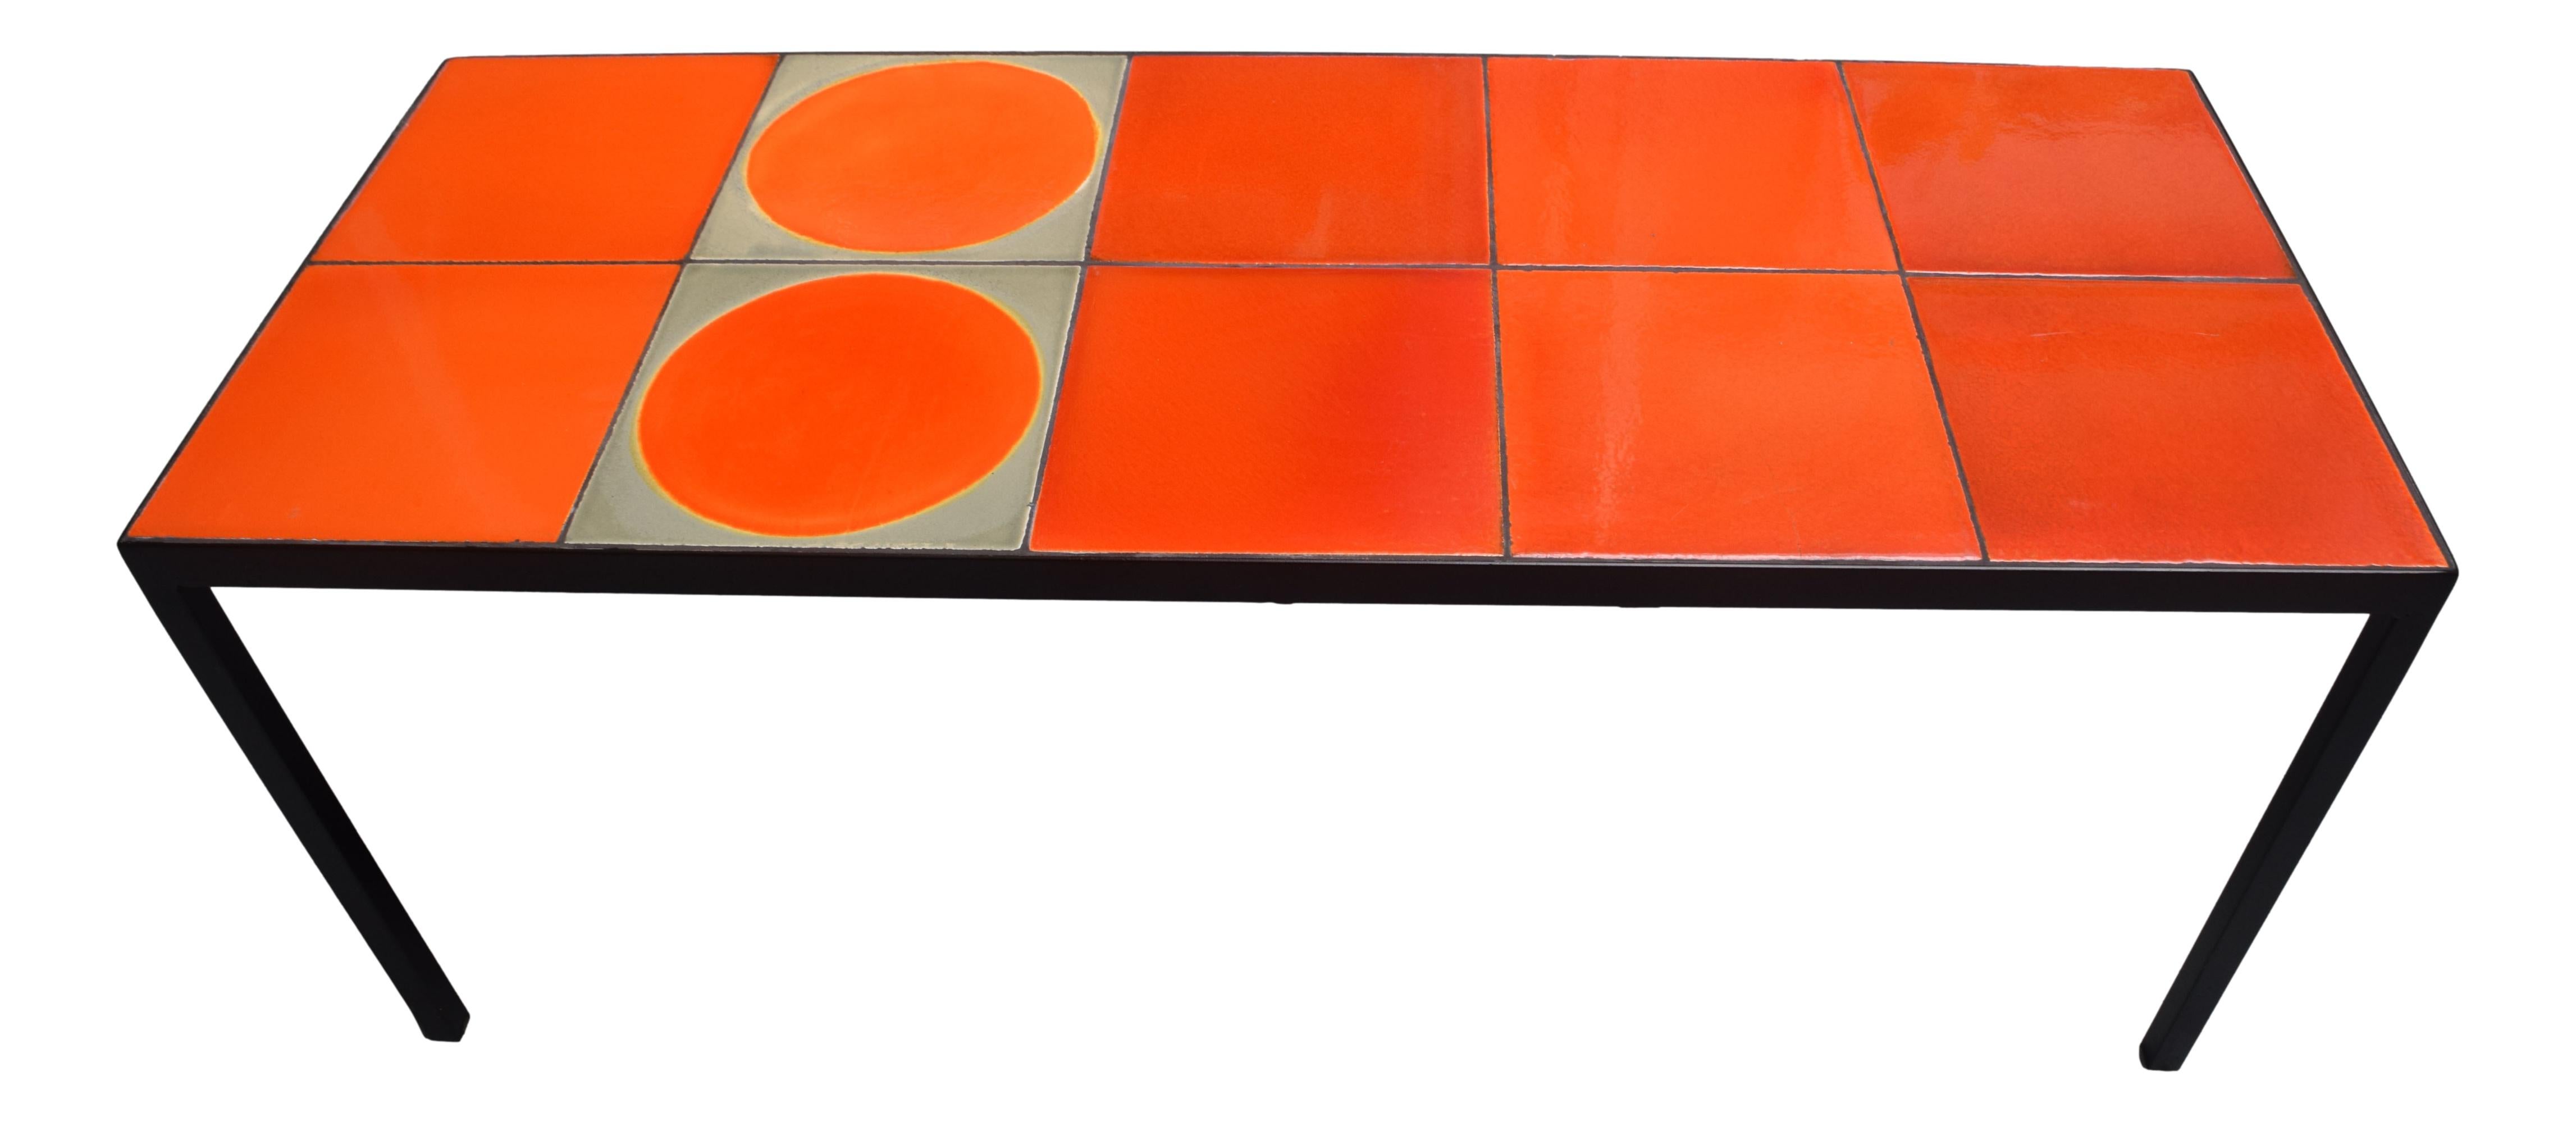 Mid-Century Modern Gueridon Coffee Table with 10 Ceramic Tiles by Roger Capron For Sale